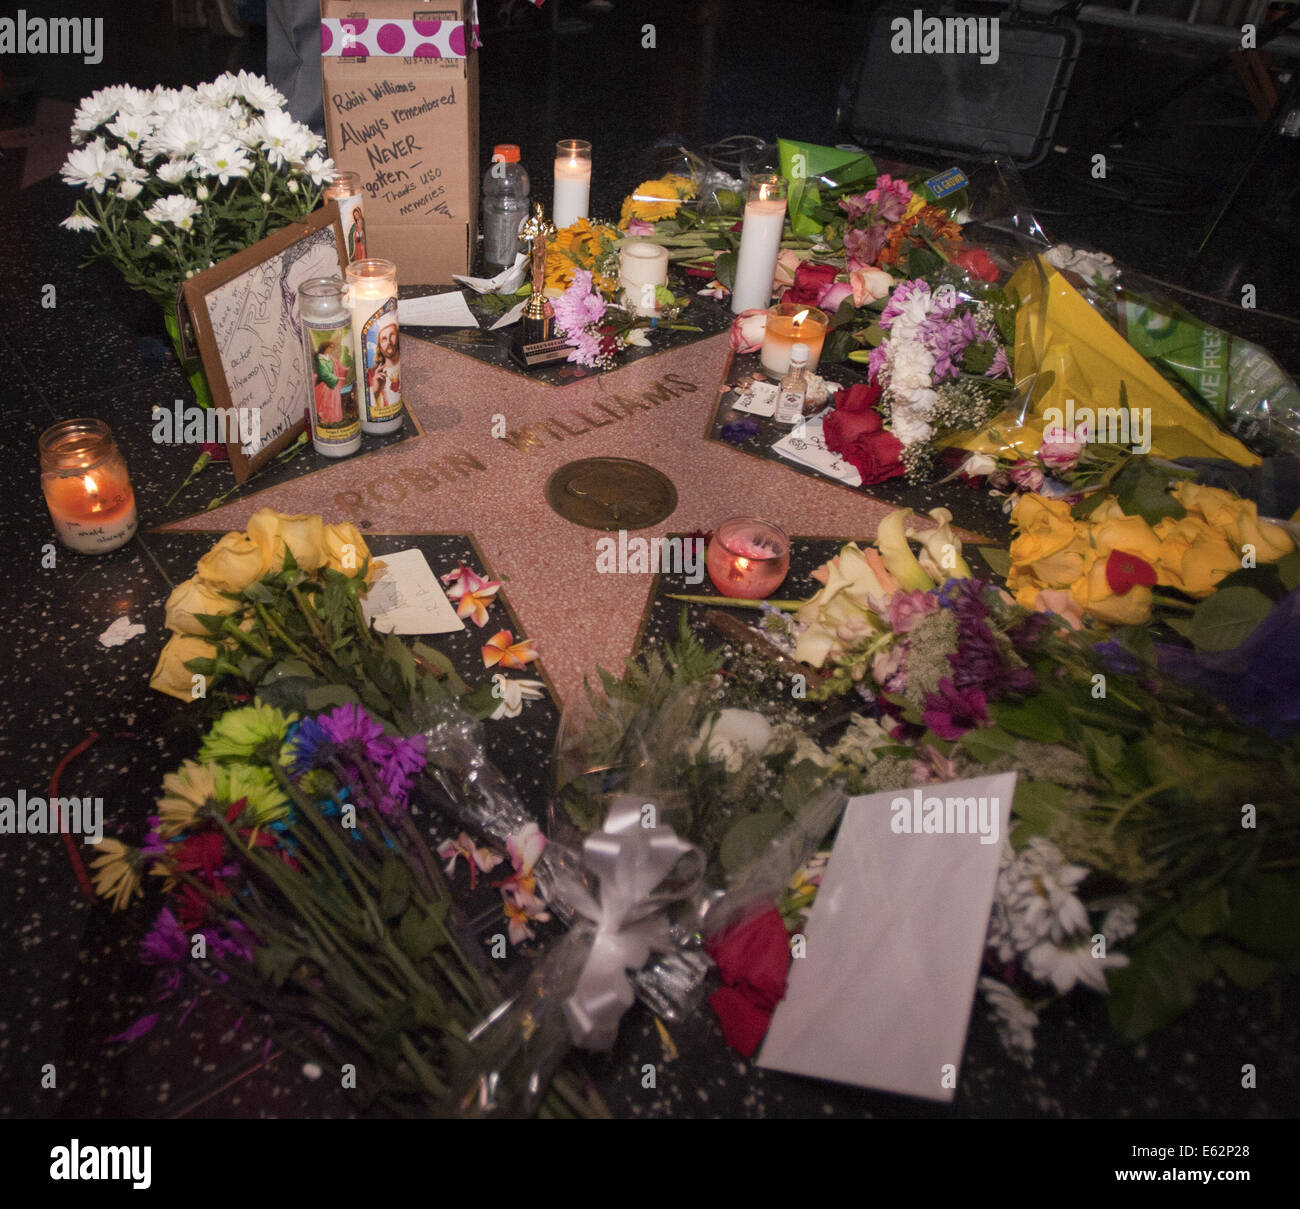 Hollywood, California, USA. 12th Aug, 2014. Fans, mourners and tourists began to leave candles, flowers and cards along Hollywood Blvd. and the Hollywood Walk of fame just east of the TCL Chinese Theatre in Hollywood at Robin William's Hollywood Star. Early Tuesday morning, more than a dozen Los Angeles media outlets had gathered at Robin William's Star in anticipation of mourners, fans and tourists gathering to pay homage to the actor and comedian.----Comedian and Actor, Robin Williams, 63, was found dead at his Tiburon, California home on Monday morning. (Credit Image: © David Bro/ZUMA Wir Stock Photo